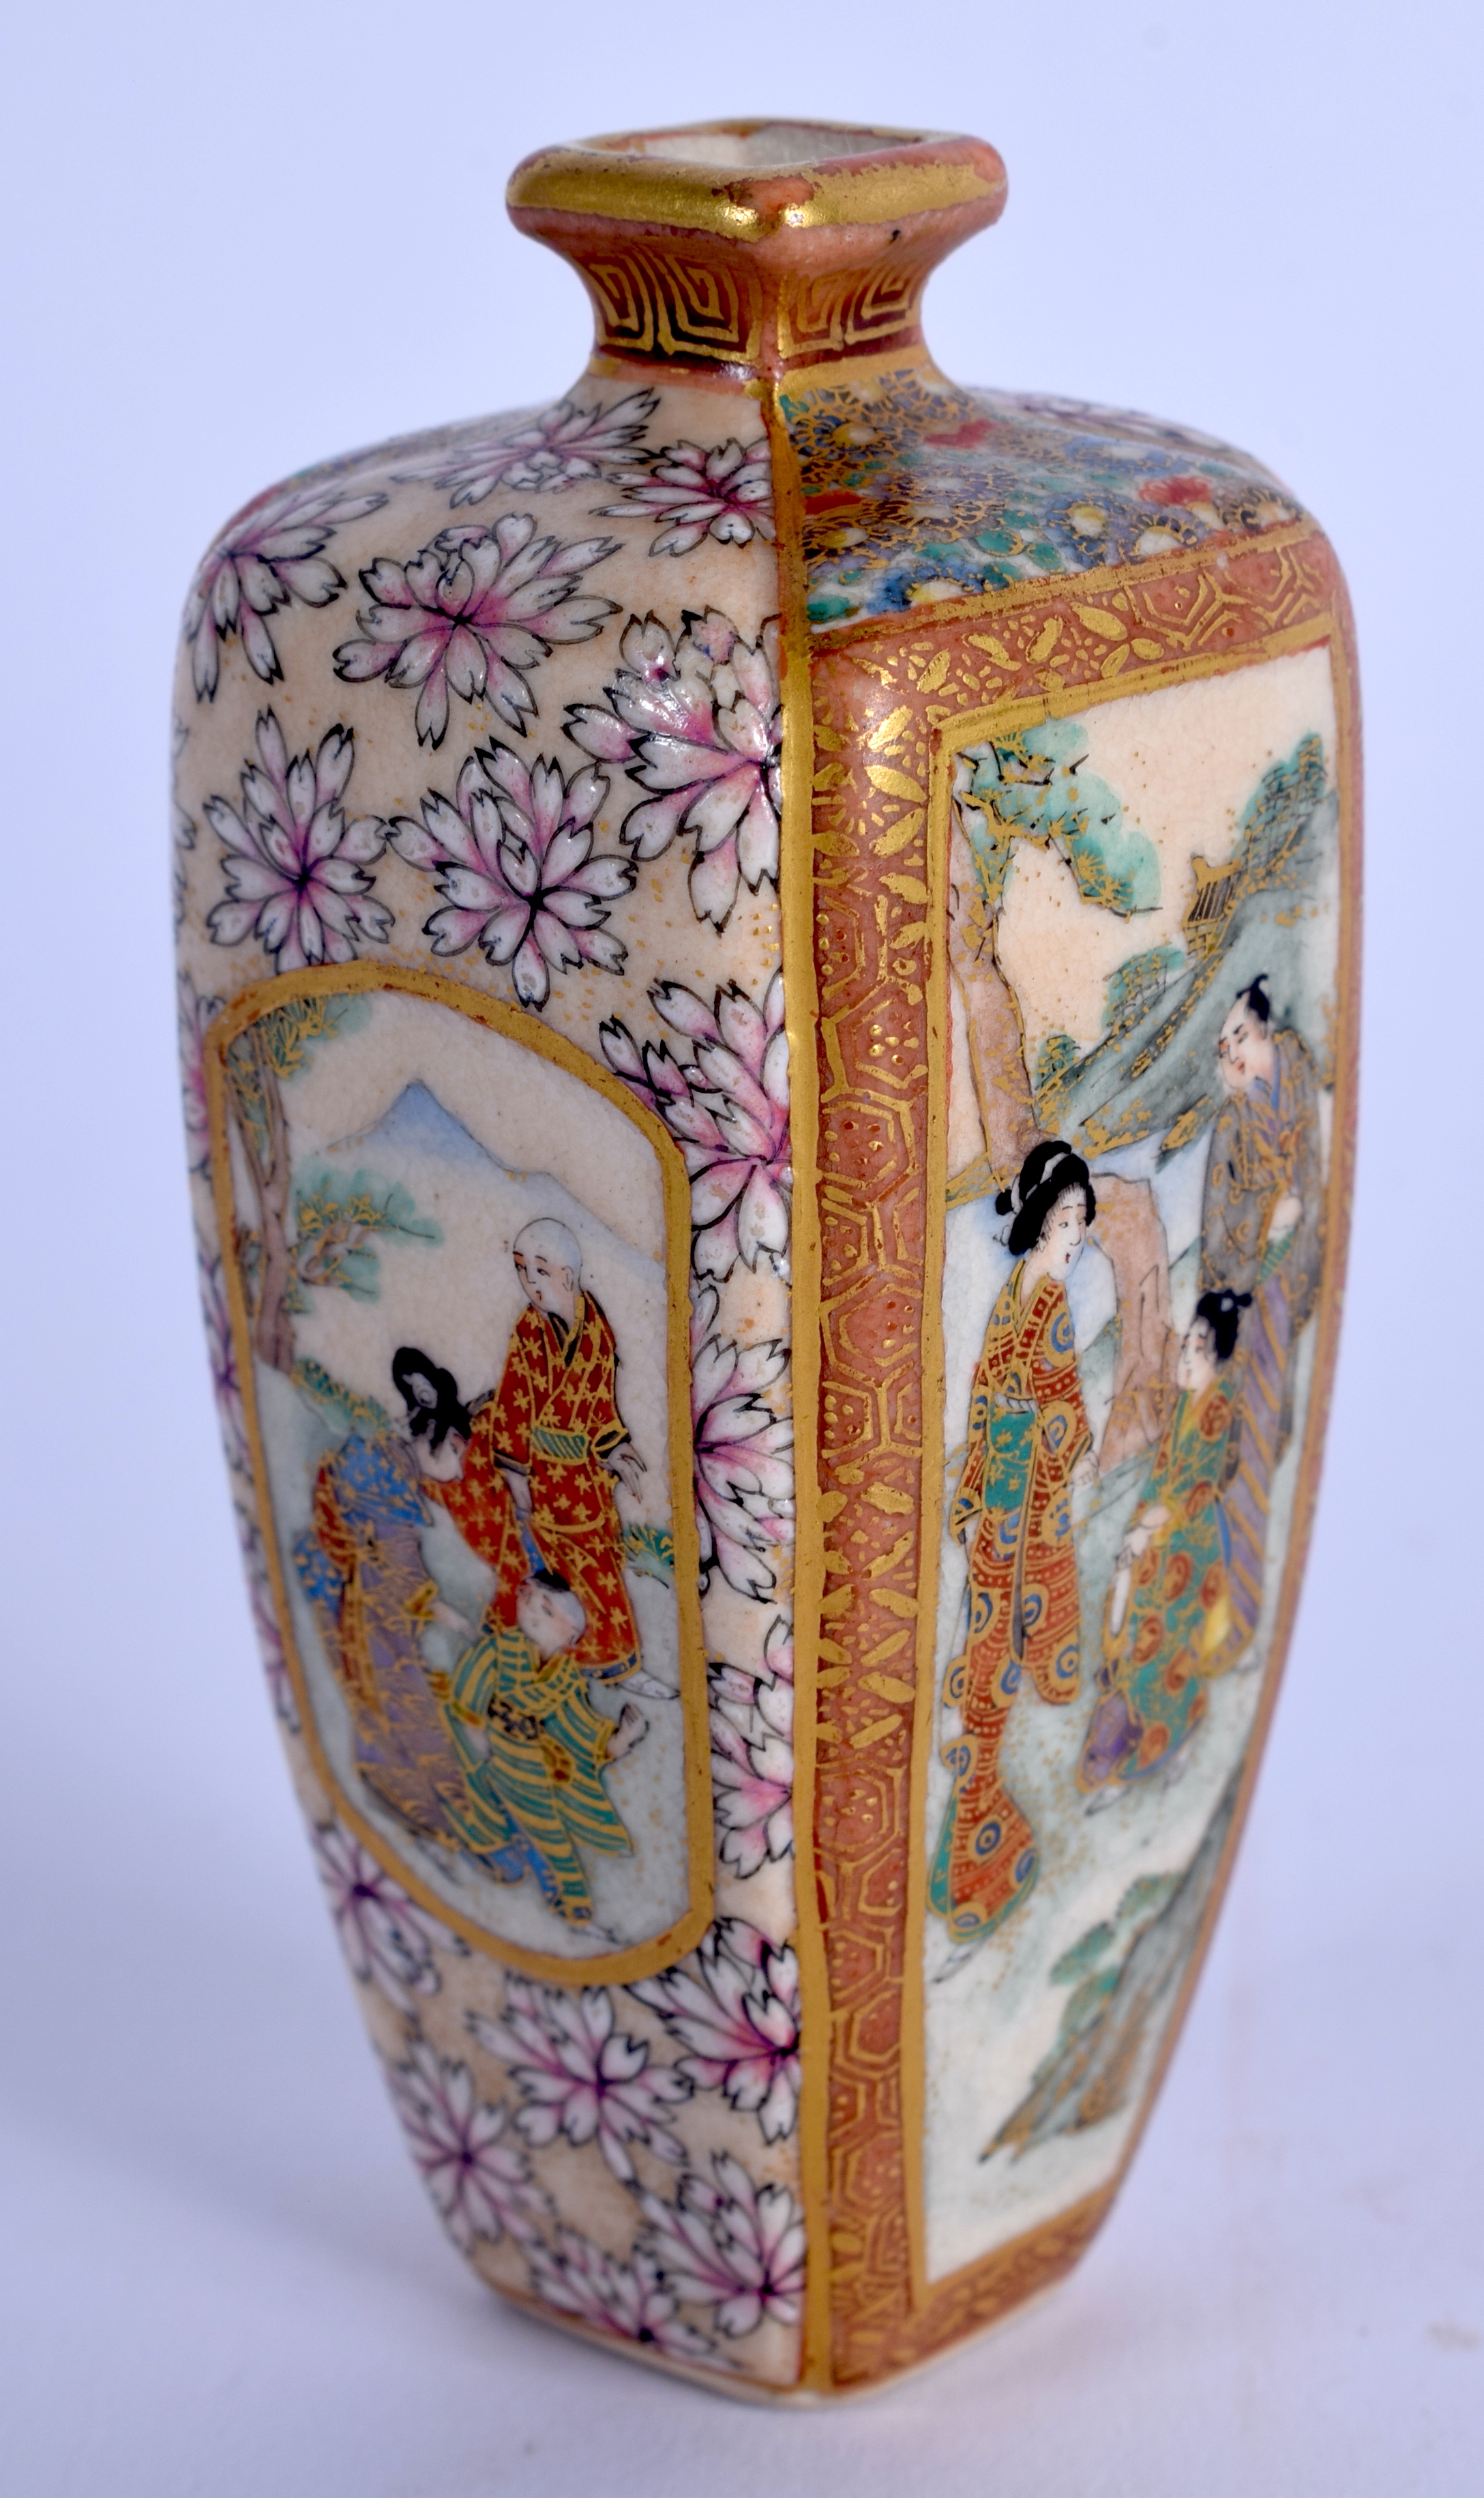 A MINIATURE LATE 19TH CENTURY JAPANESE MEIJI PERIOD SATSUMA VASE painted with figures and foliage. 7 - Image 2 of 3